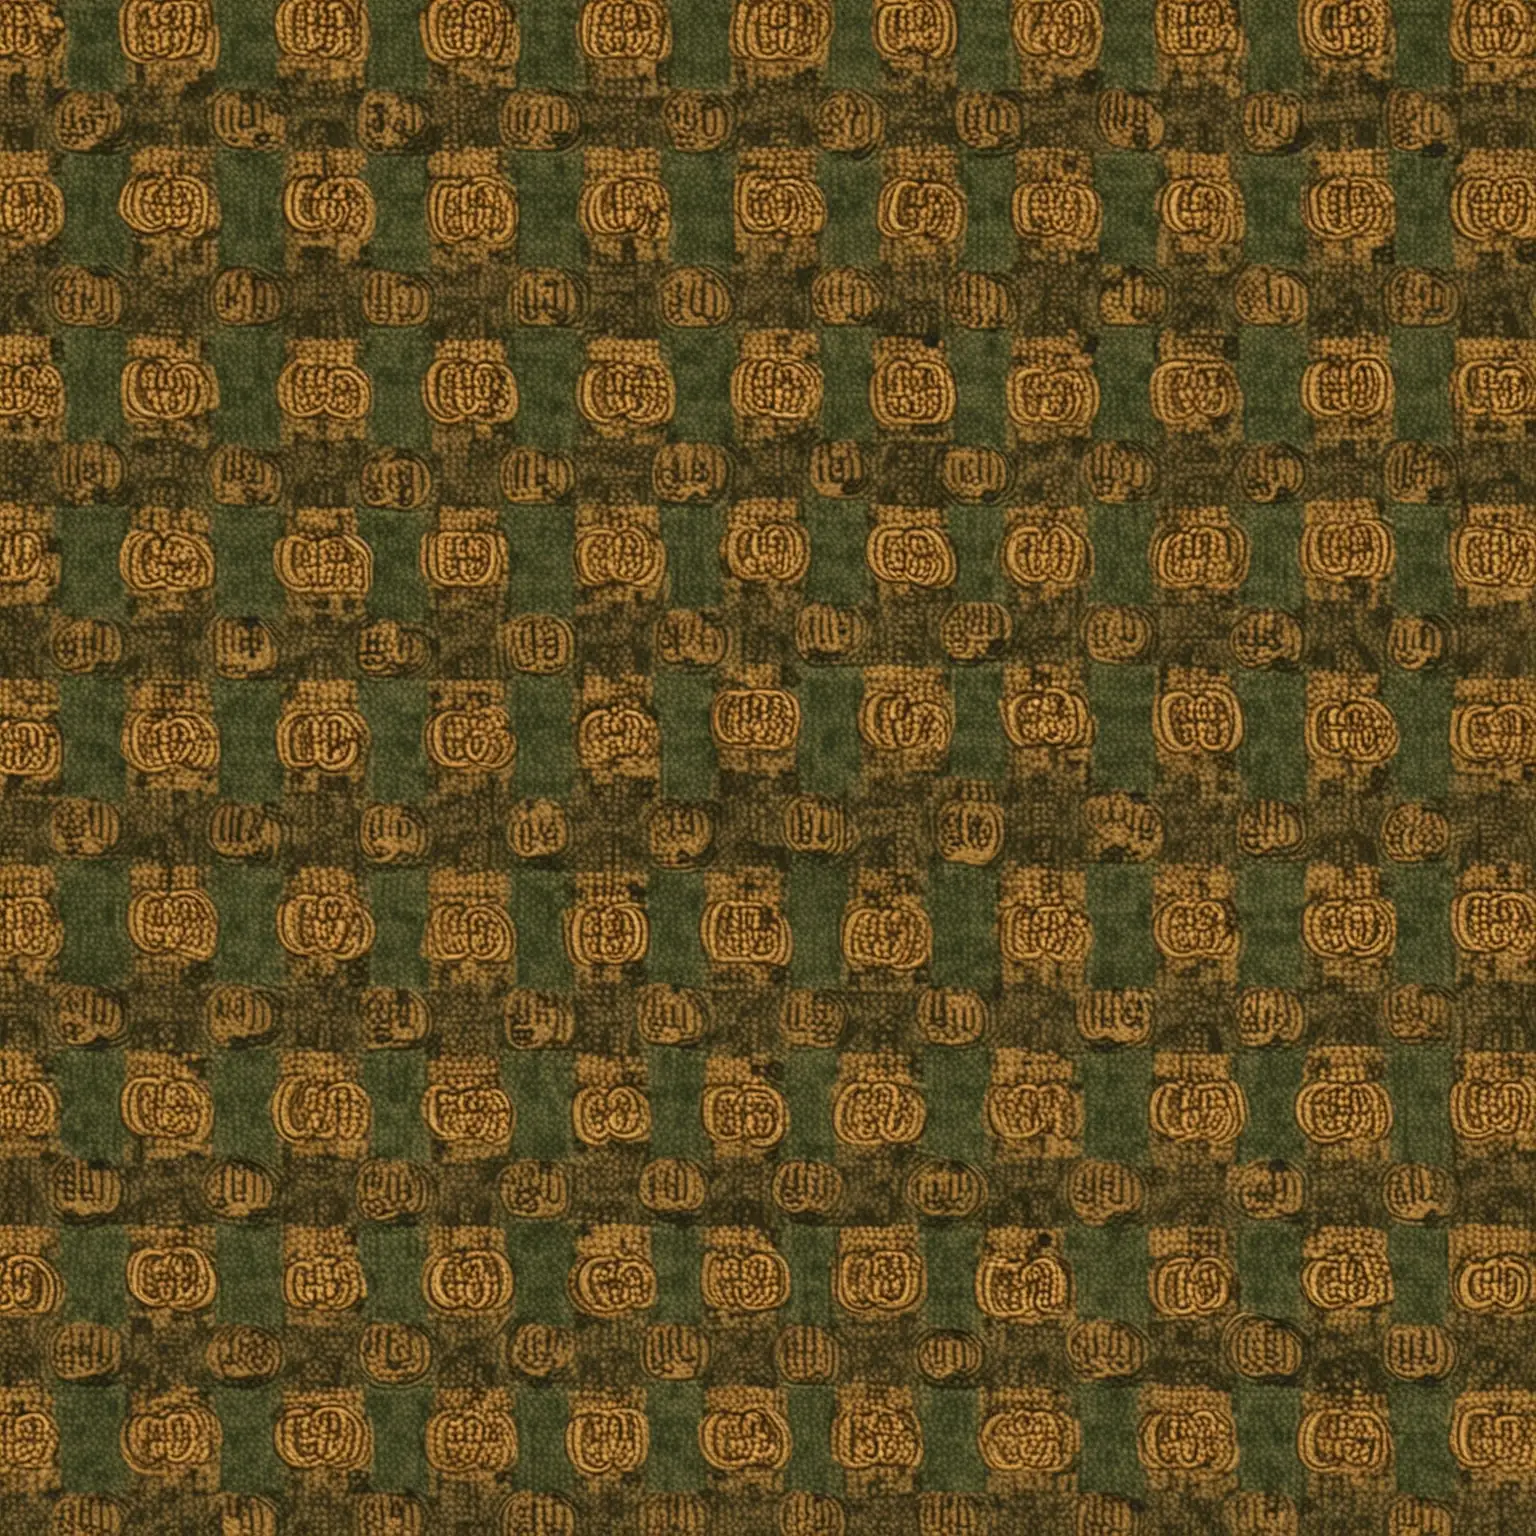 Luxurious Gucci Pattern in Green Brown and Gold